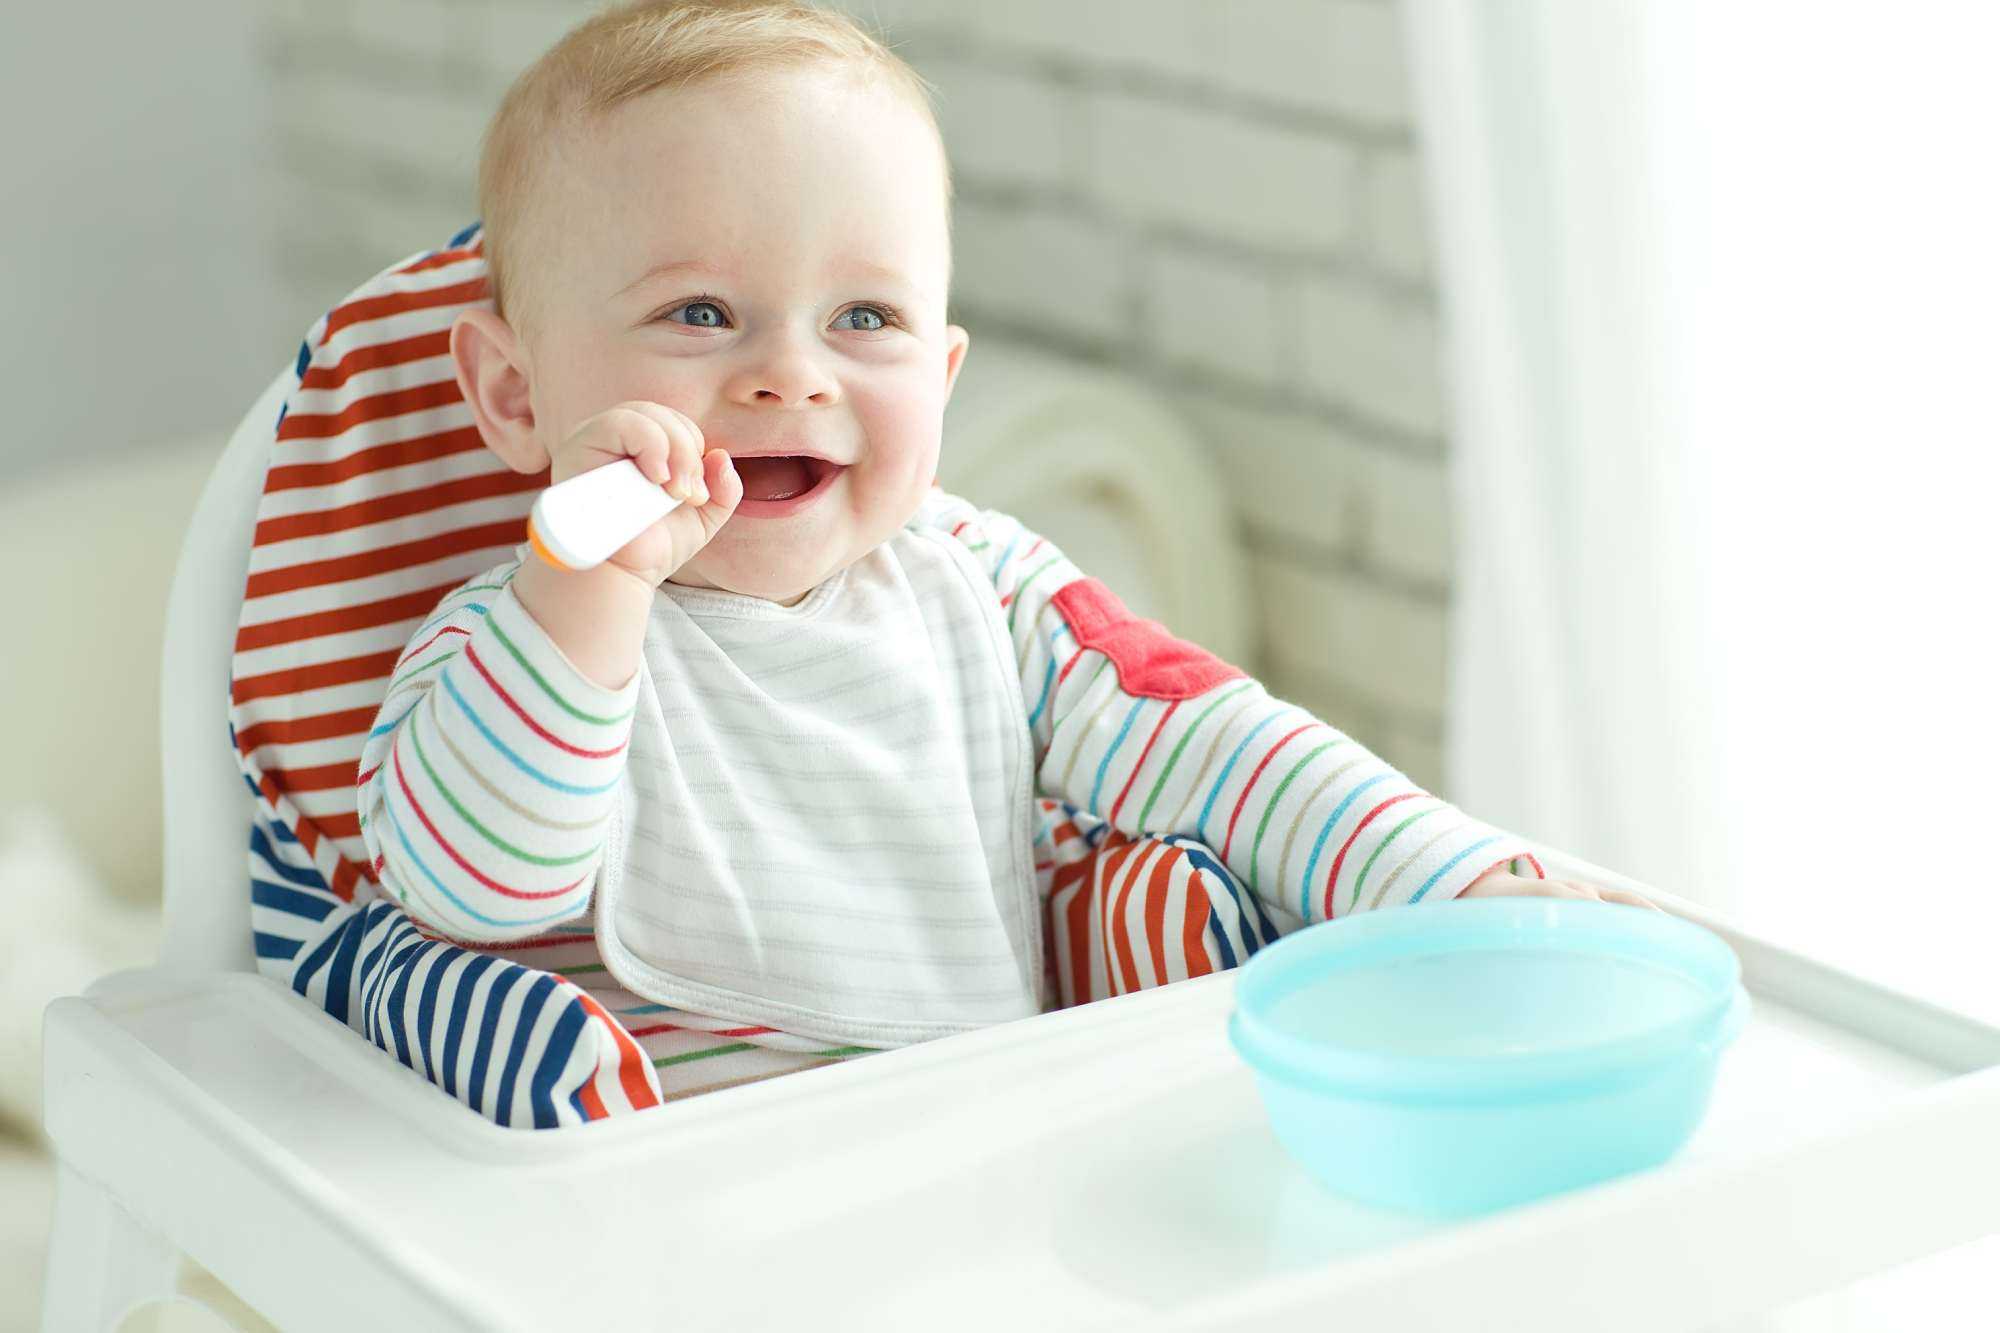  Smiling baby in highchair with spilled food